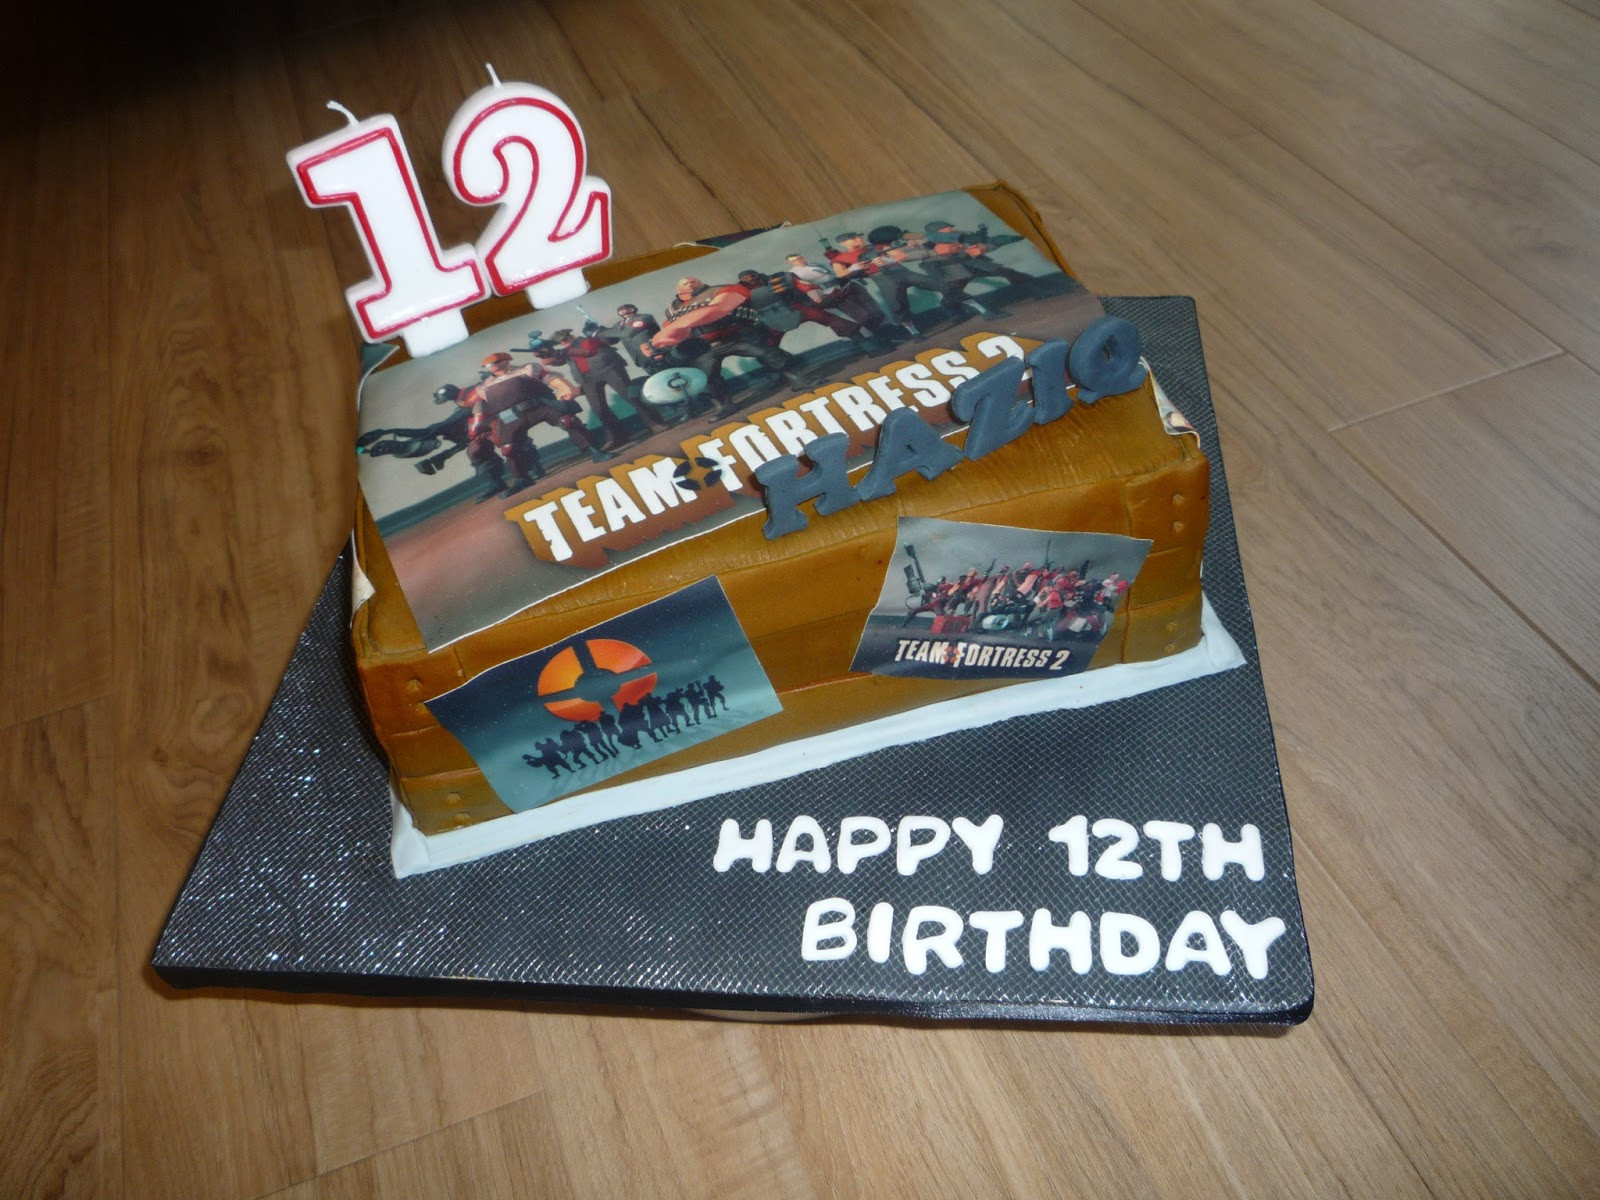 Team Fortress 2 Birthday Party Ideas
 Pink Ellies Novelty Cakes "Haziq Turns 12"